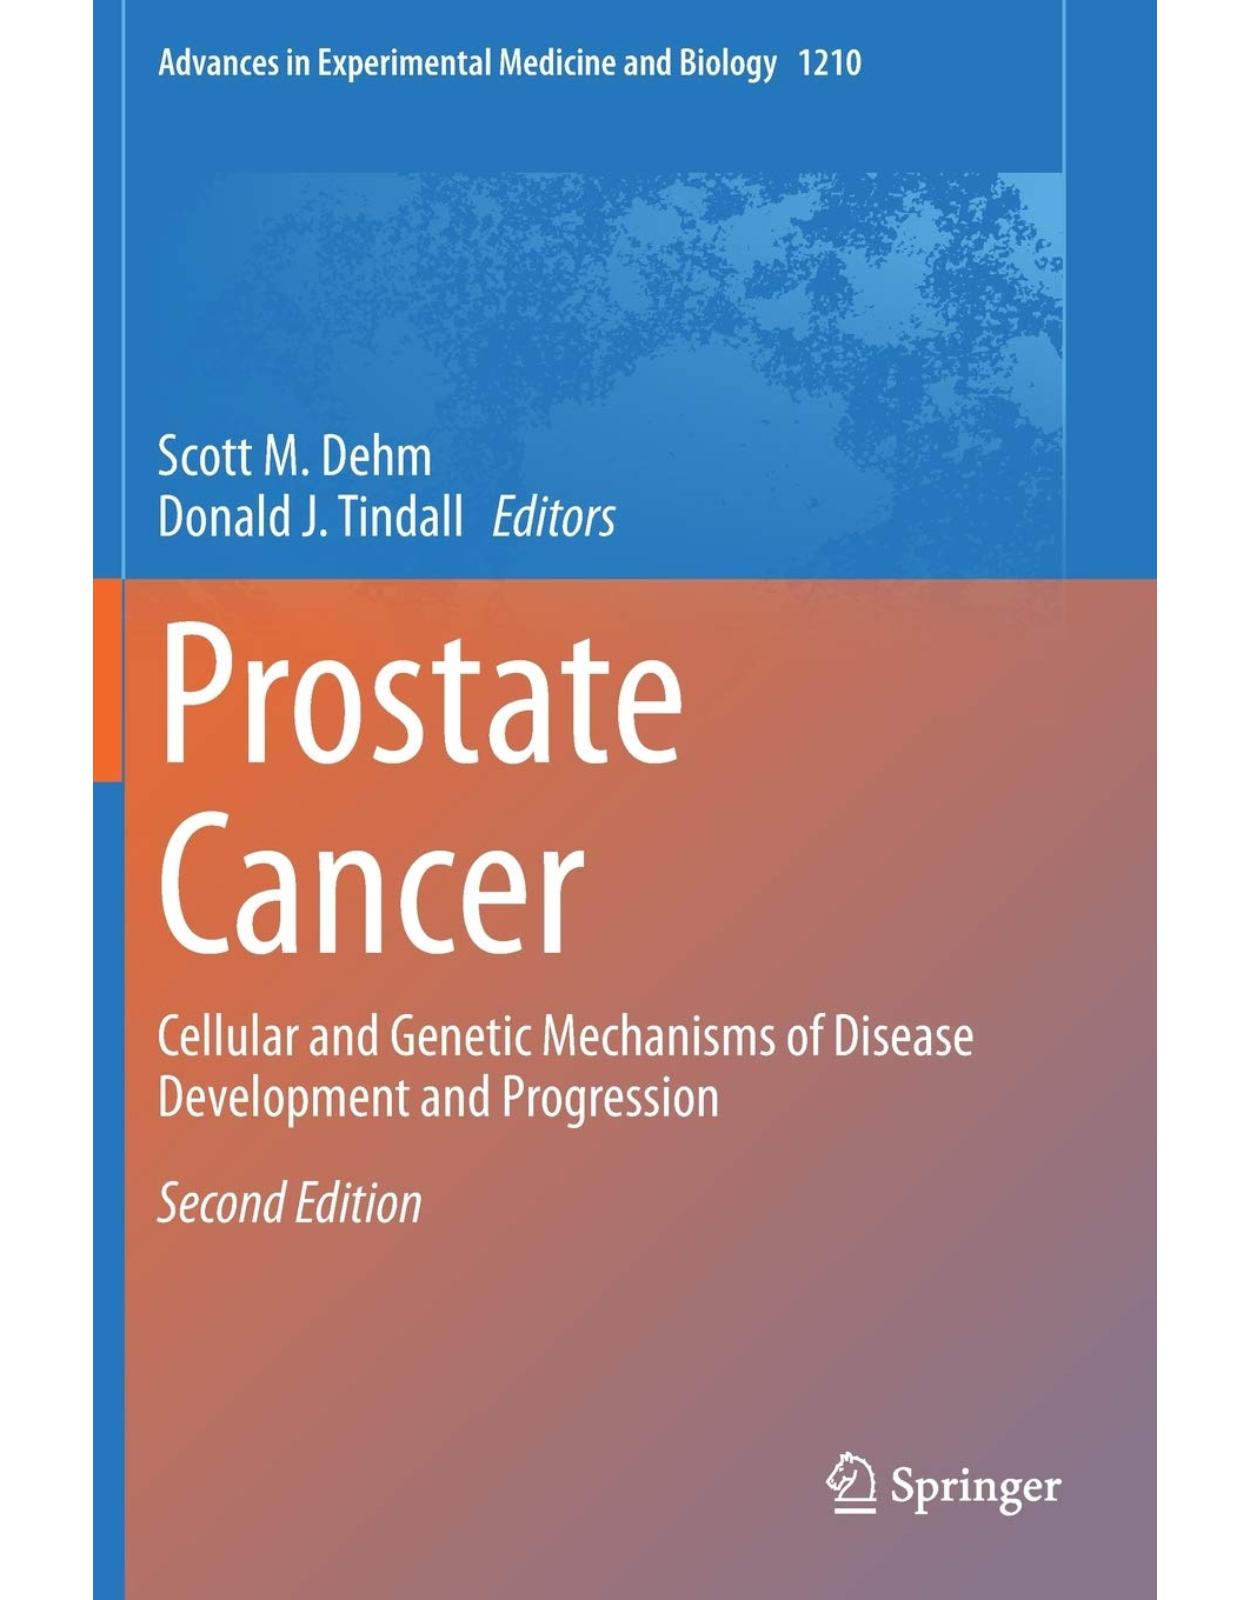 Prostate Cancer: Cellular and Genetic Mechanisms of Disease Development and Progression